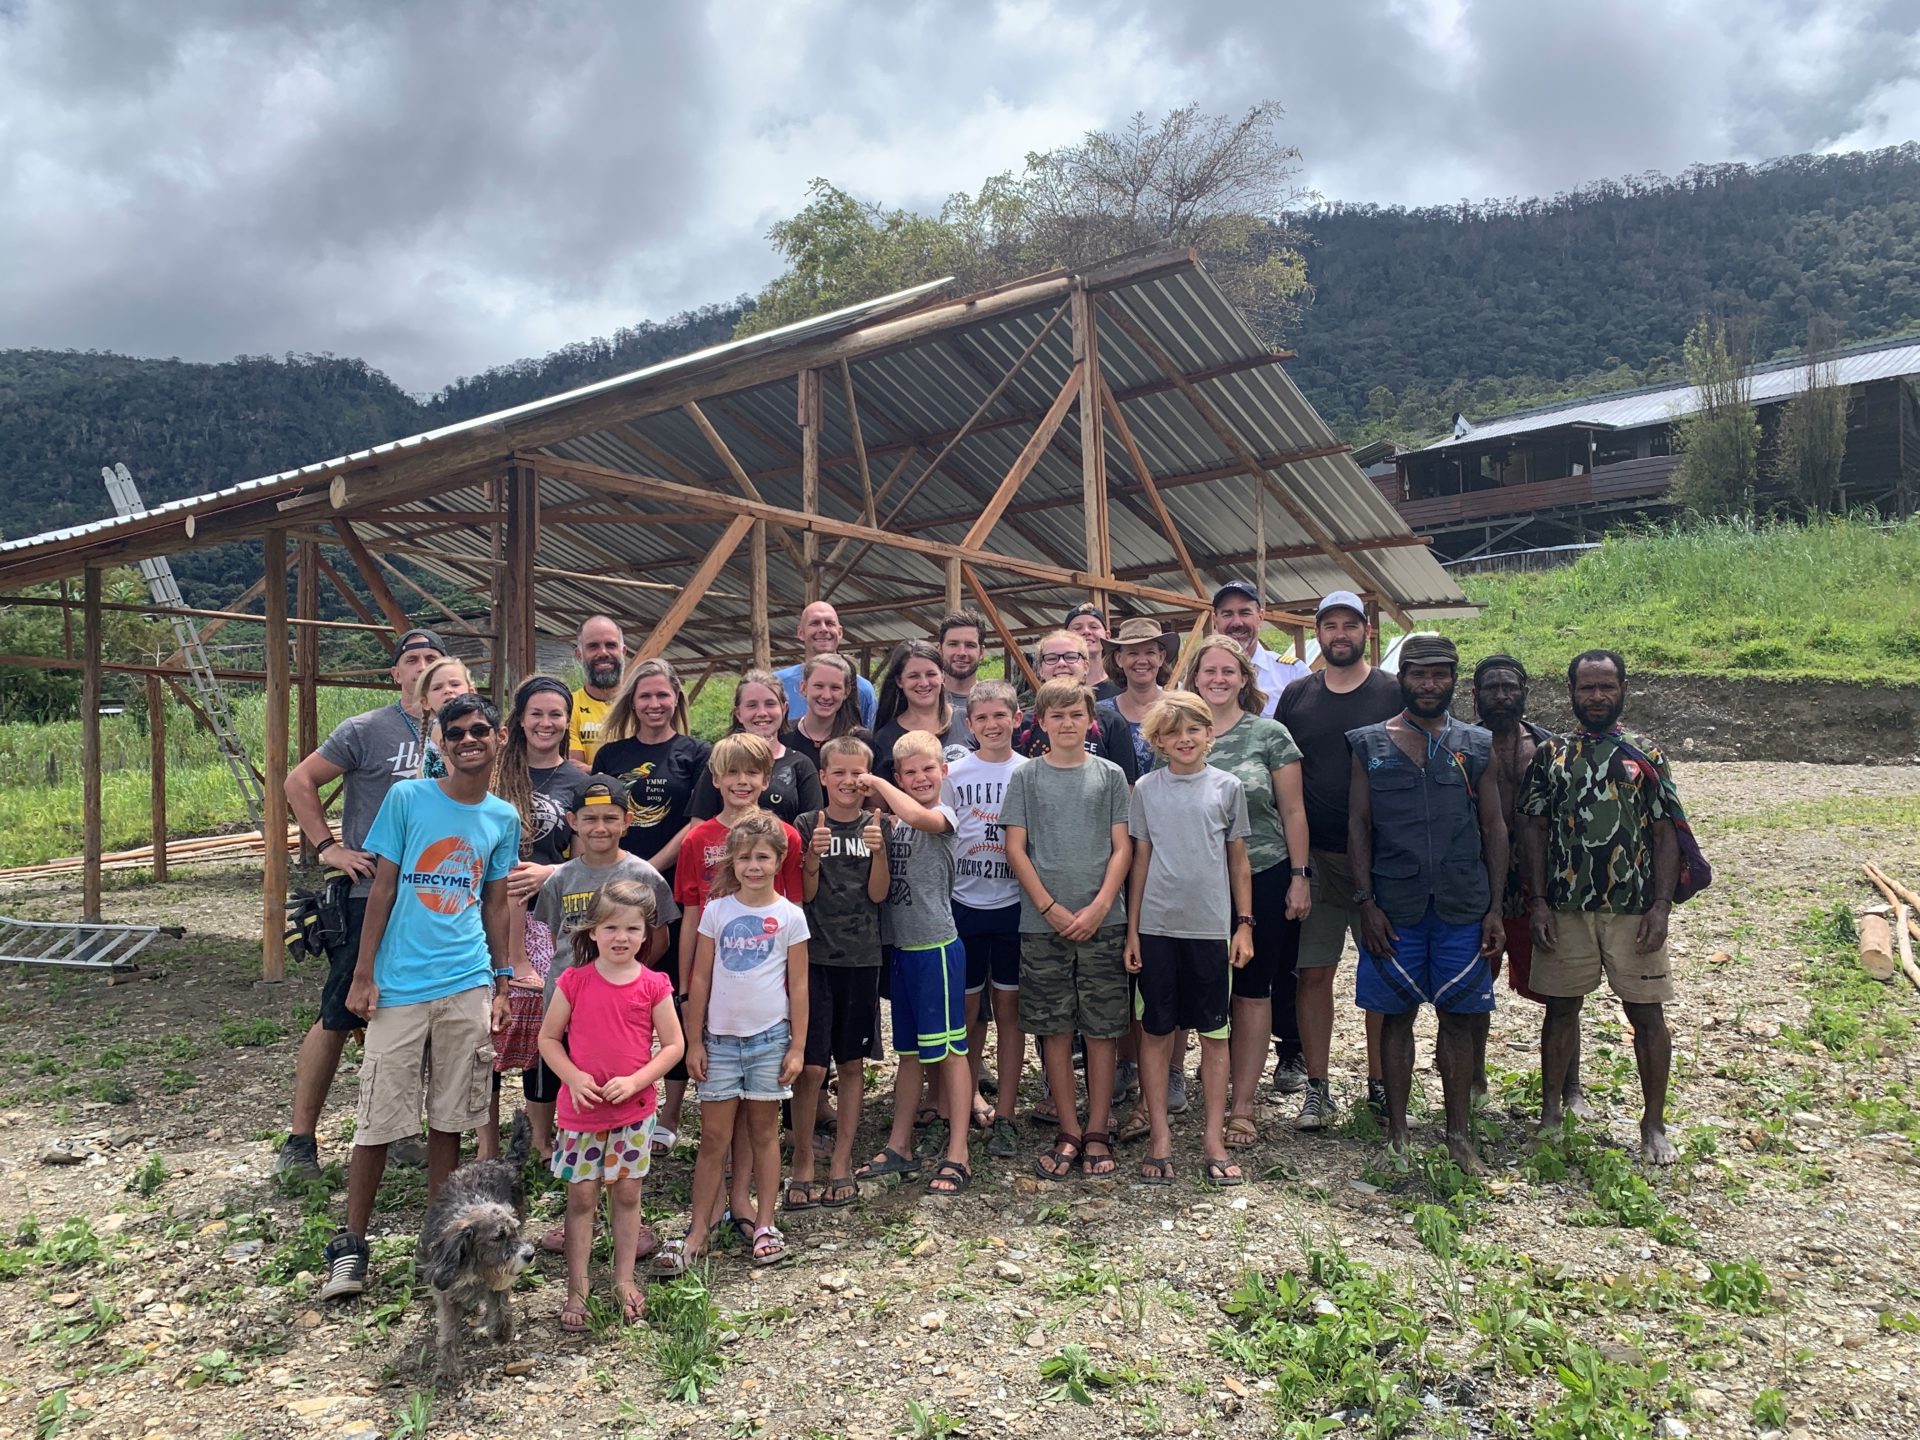 Mission Aviation Fellowship families help build a structure for gospel teaching in Papua, Indonesia.